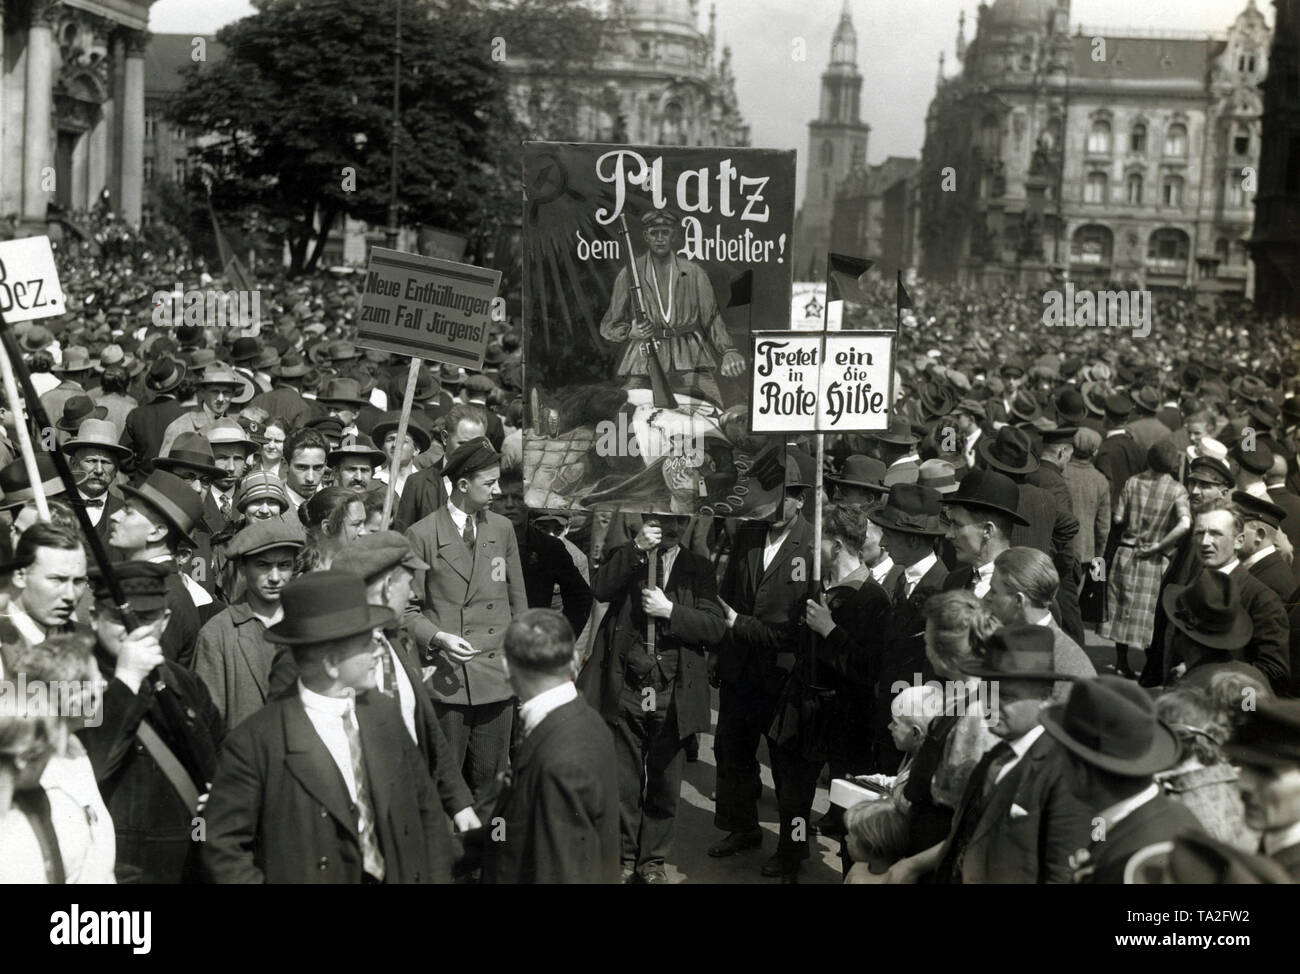 May Day of the Berlin KPD. The protesters hold up banners, on which stands 'Place for the worker!', 'Enter the Rote Hilfe (Red Aid).' Stock Photo